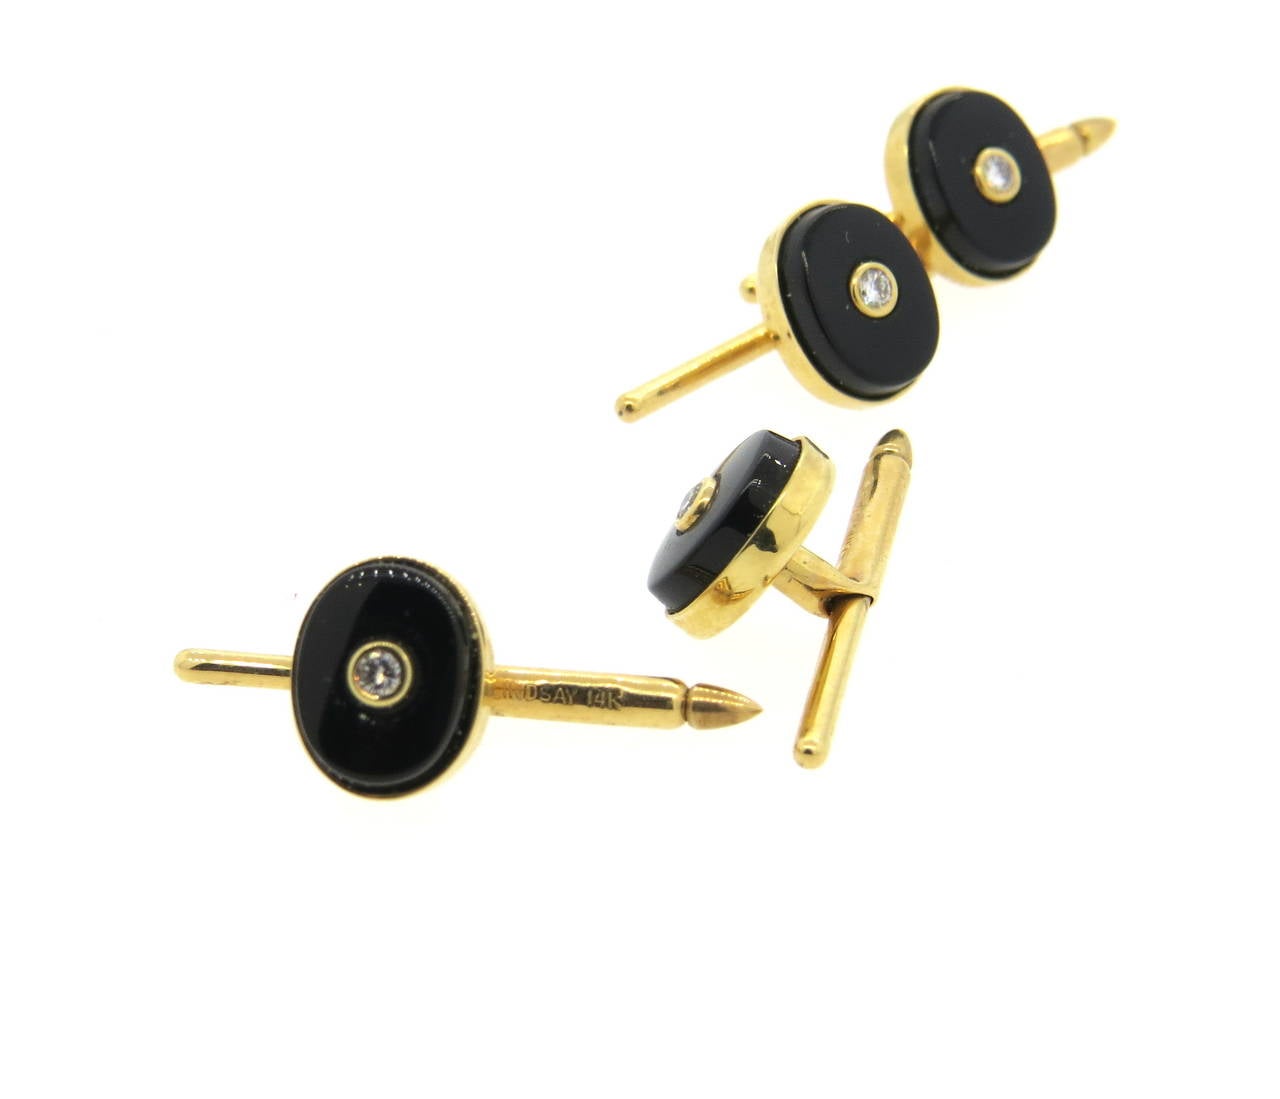 14k gold dress studs set of 4, crafted by Lindsay & Co. Each stud is set with a diamond in the center and black onyx top, measuring 10.5mm x 8.7mm. Marked 14k Lindsay. Weight of the set - 7.8 grams